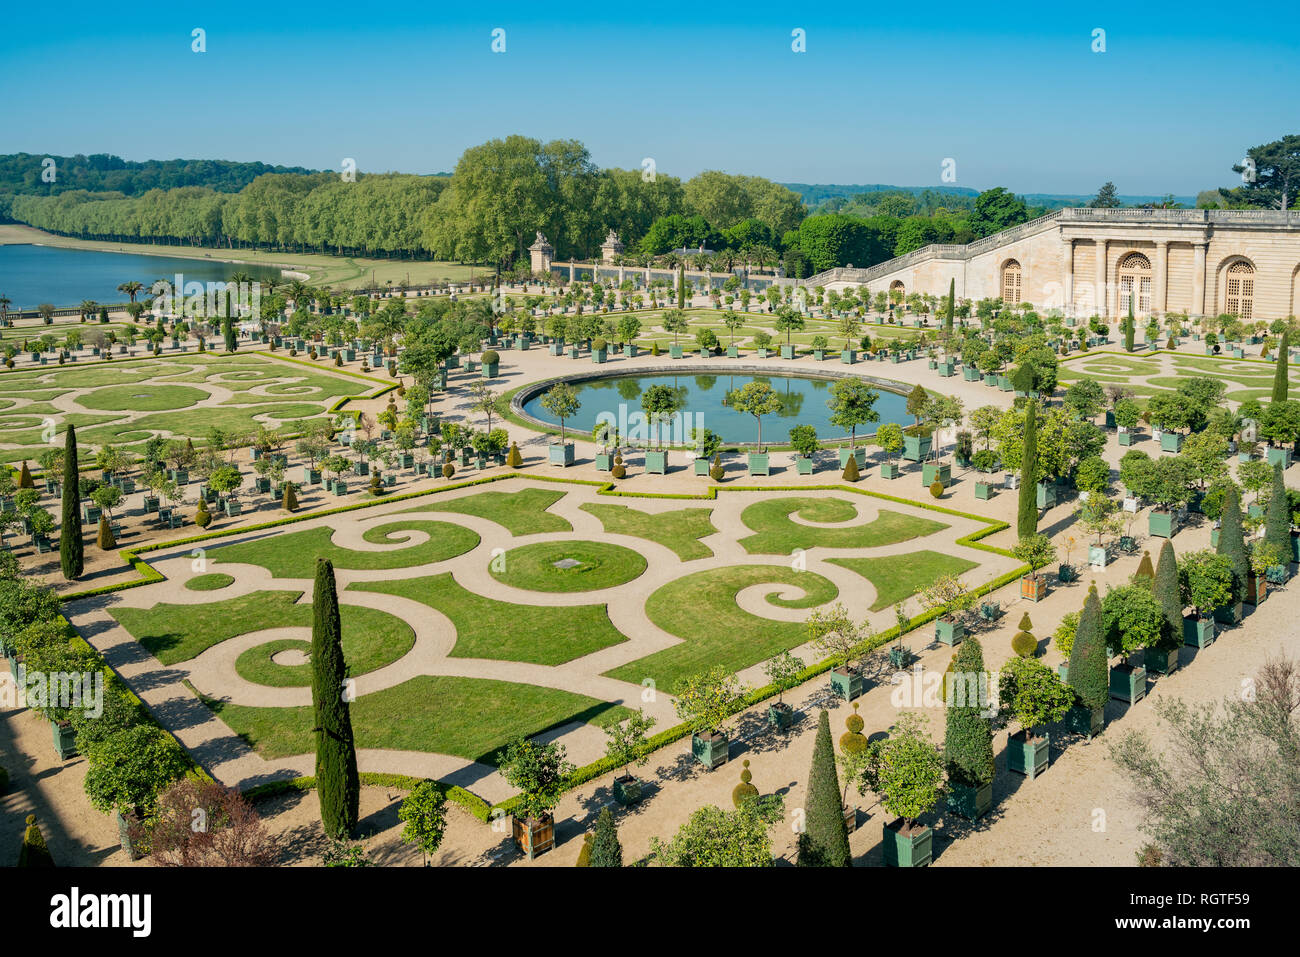 The beautiful garden, fountain of Place of Versailles at France Stock Photo